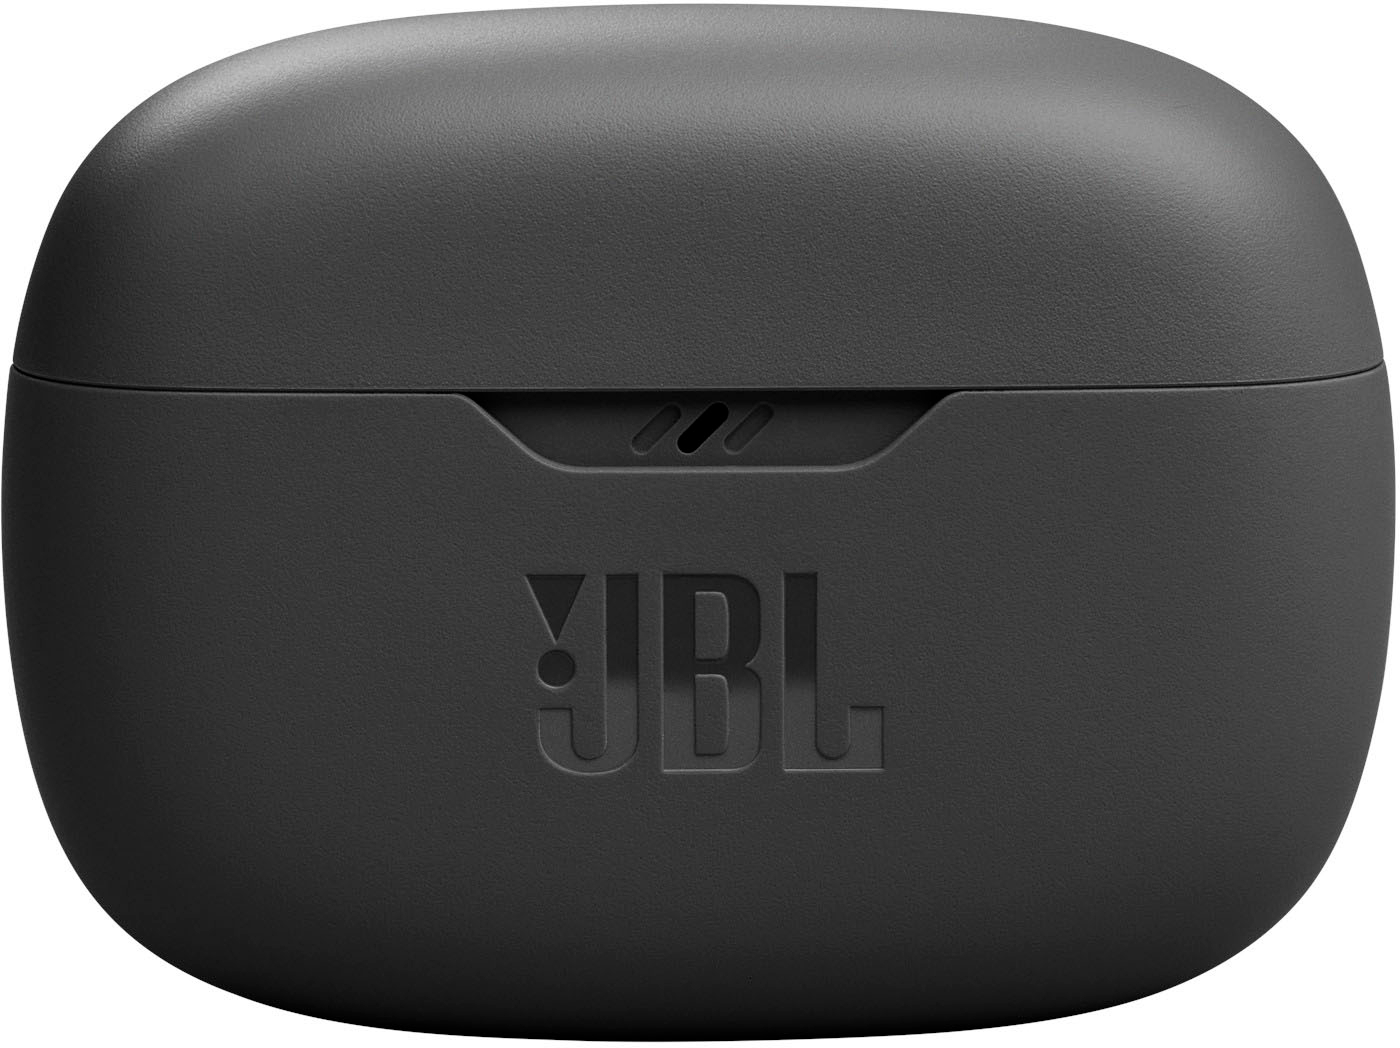 JBL Tune Flex TWS Earphones With 'Sound Fit', Up to 32 Hours of Battery  Launched in India